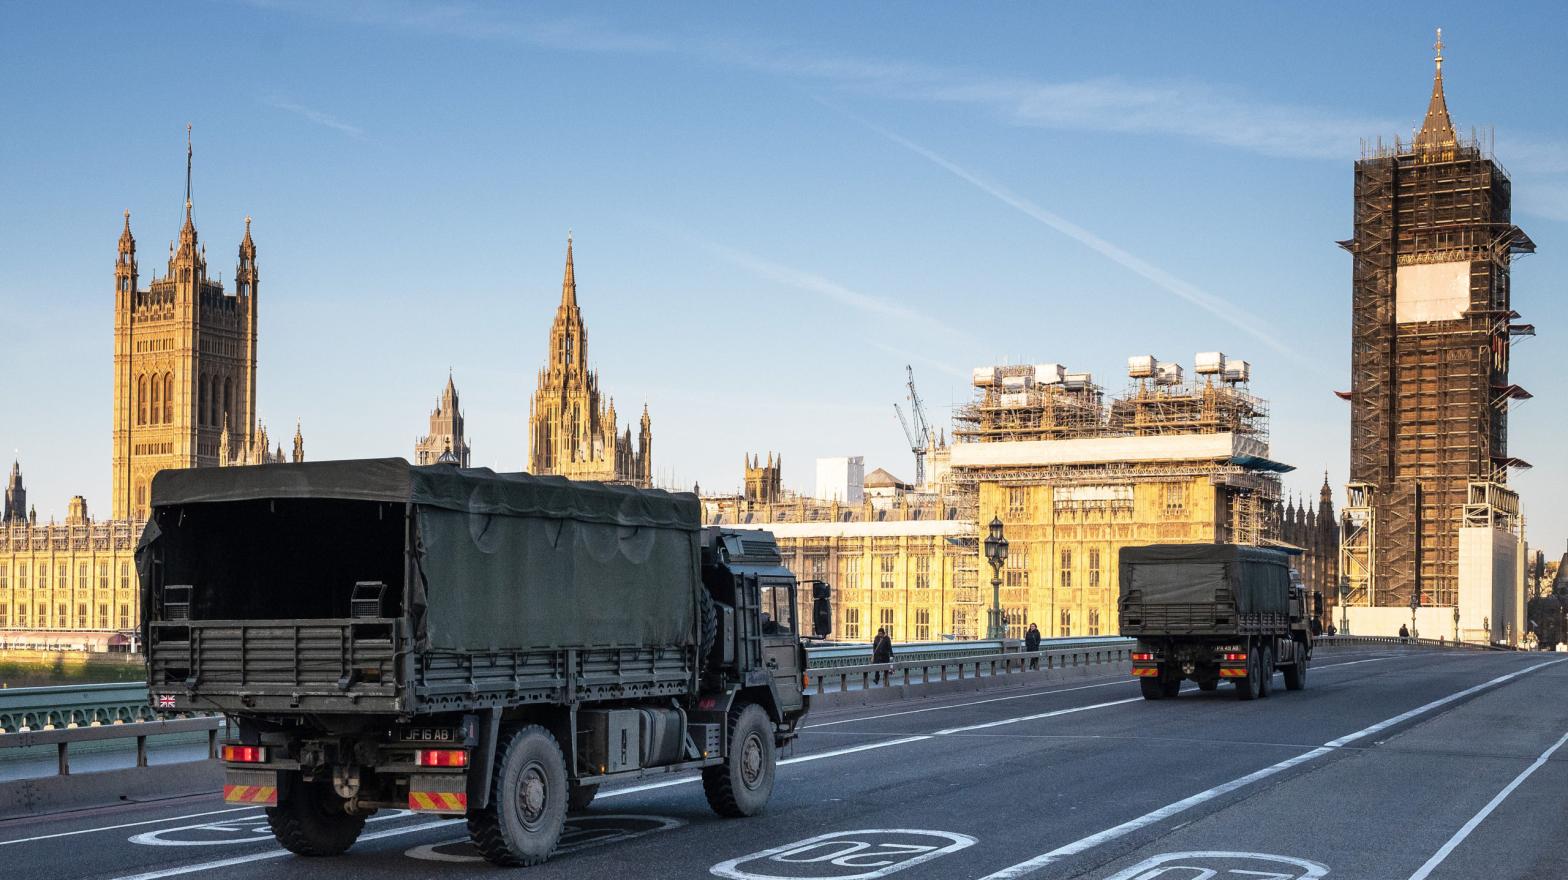 Military vehicles cross Westminster Bridge on March 24, 2020 in London, England. (Photo: Leon Neal, Getty Images)